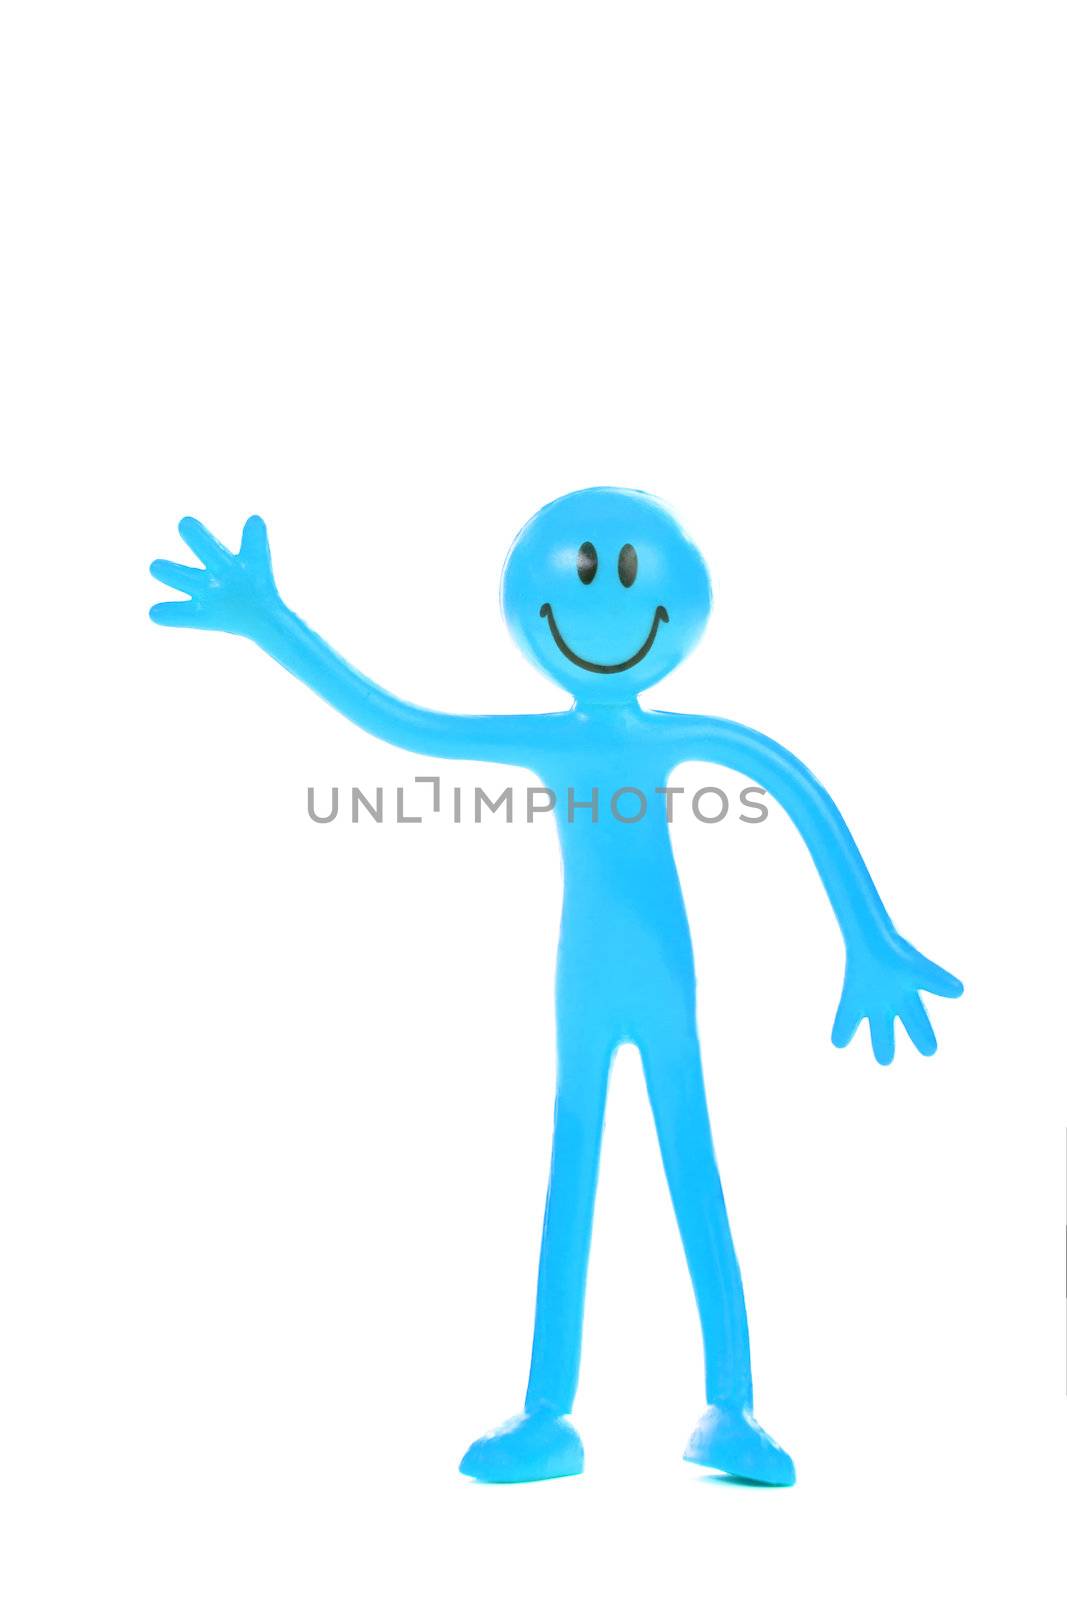 The blue smiling man. Isolated on white.